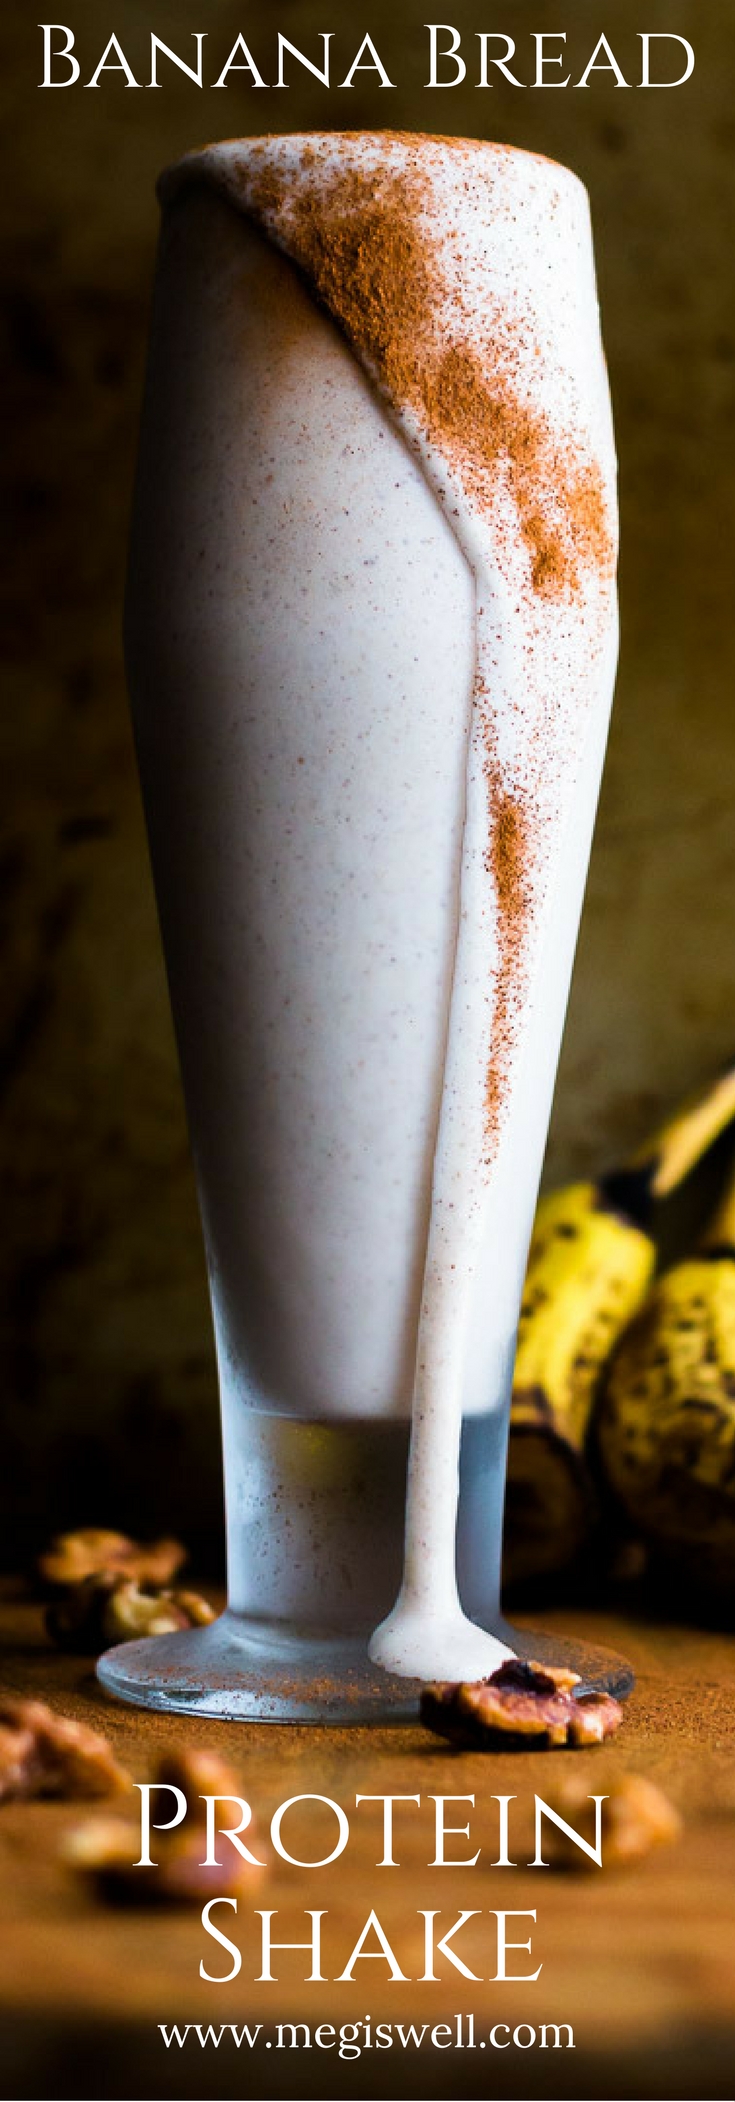 This Banana Bread Protein Shake fills you up and gives you fuel for the rest of the day while also tasting like a delicious slice of banana bread. | www.megiswell.com